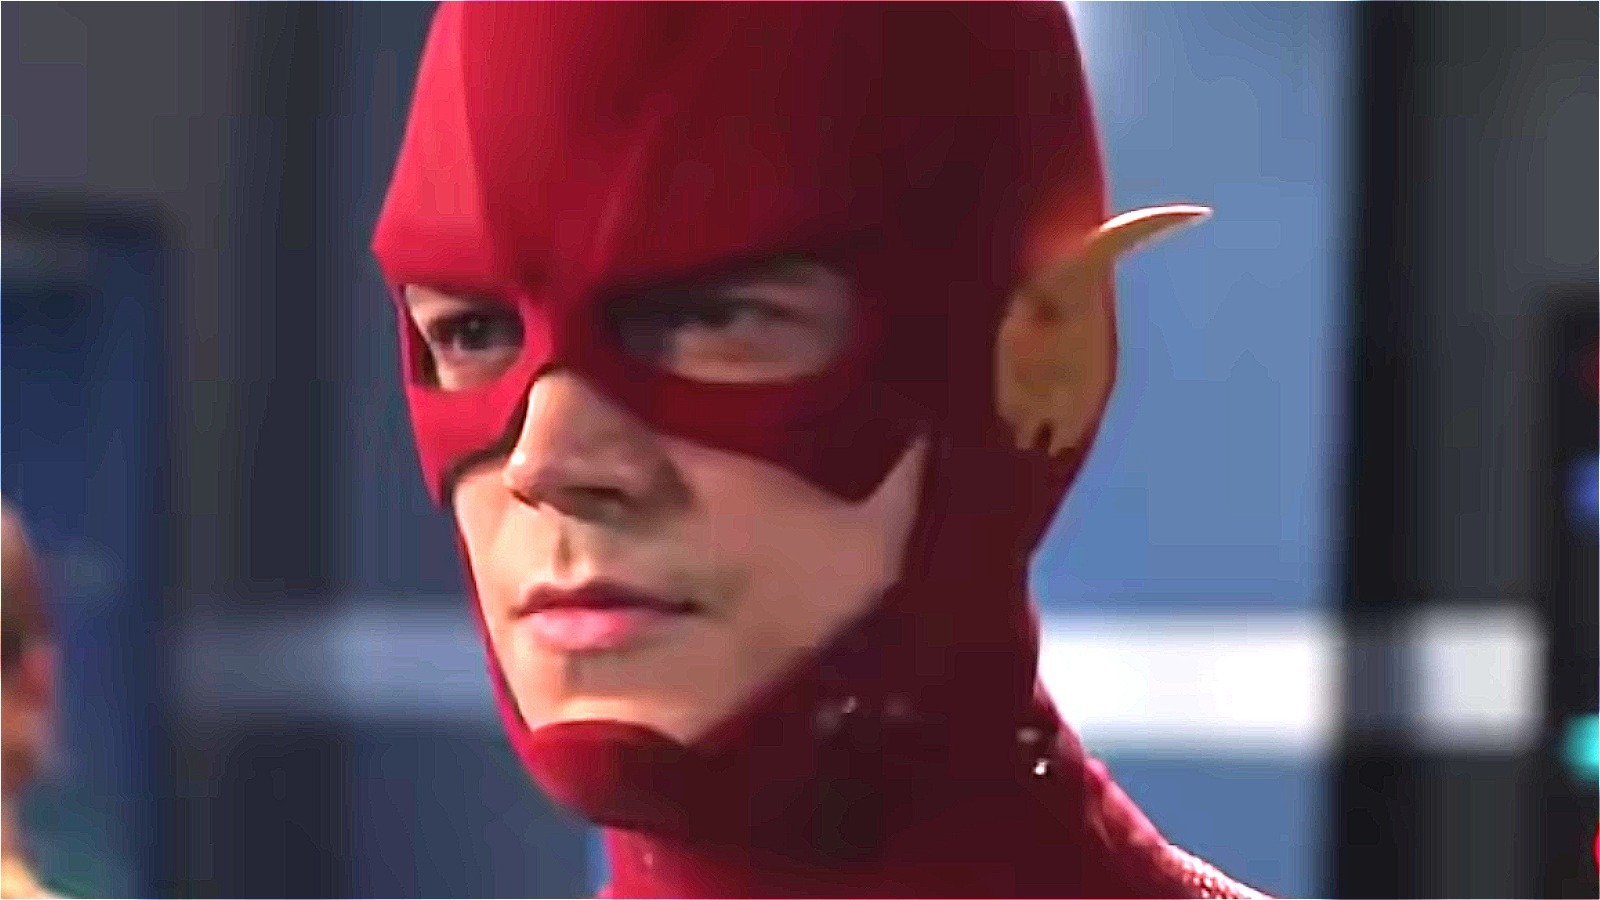 The Flash: 22 Easter eggs and cameos you might have missed in the DC movie